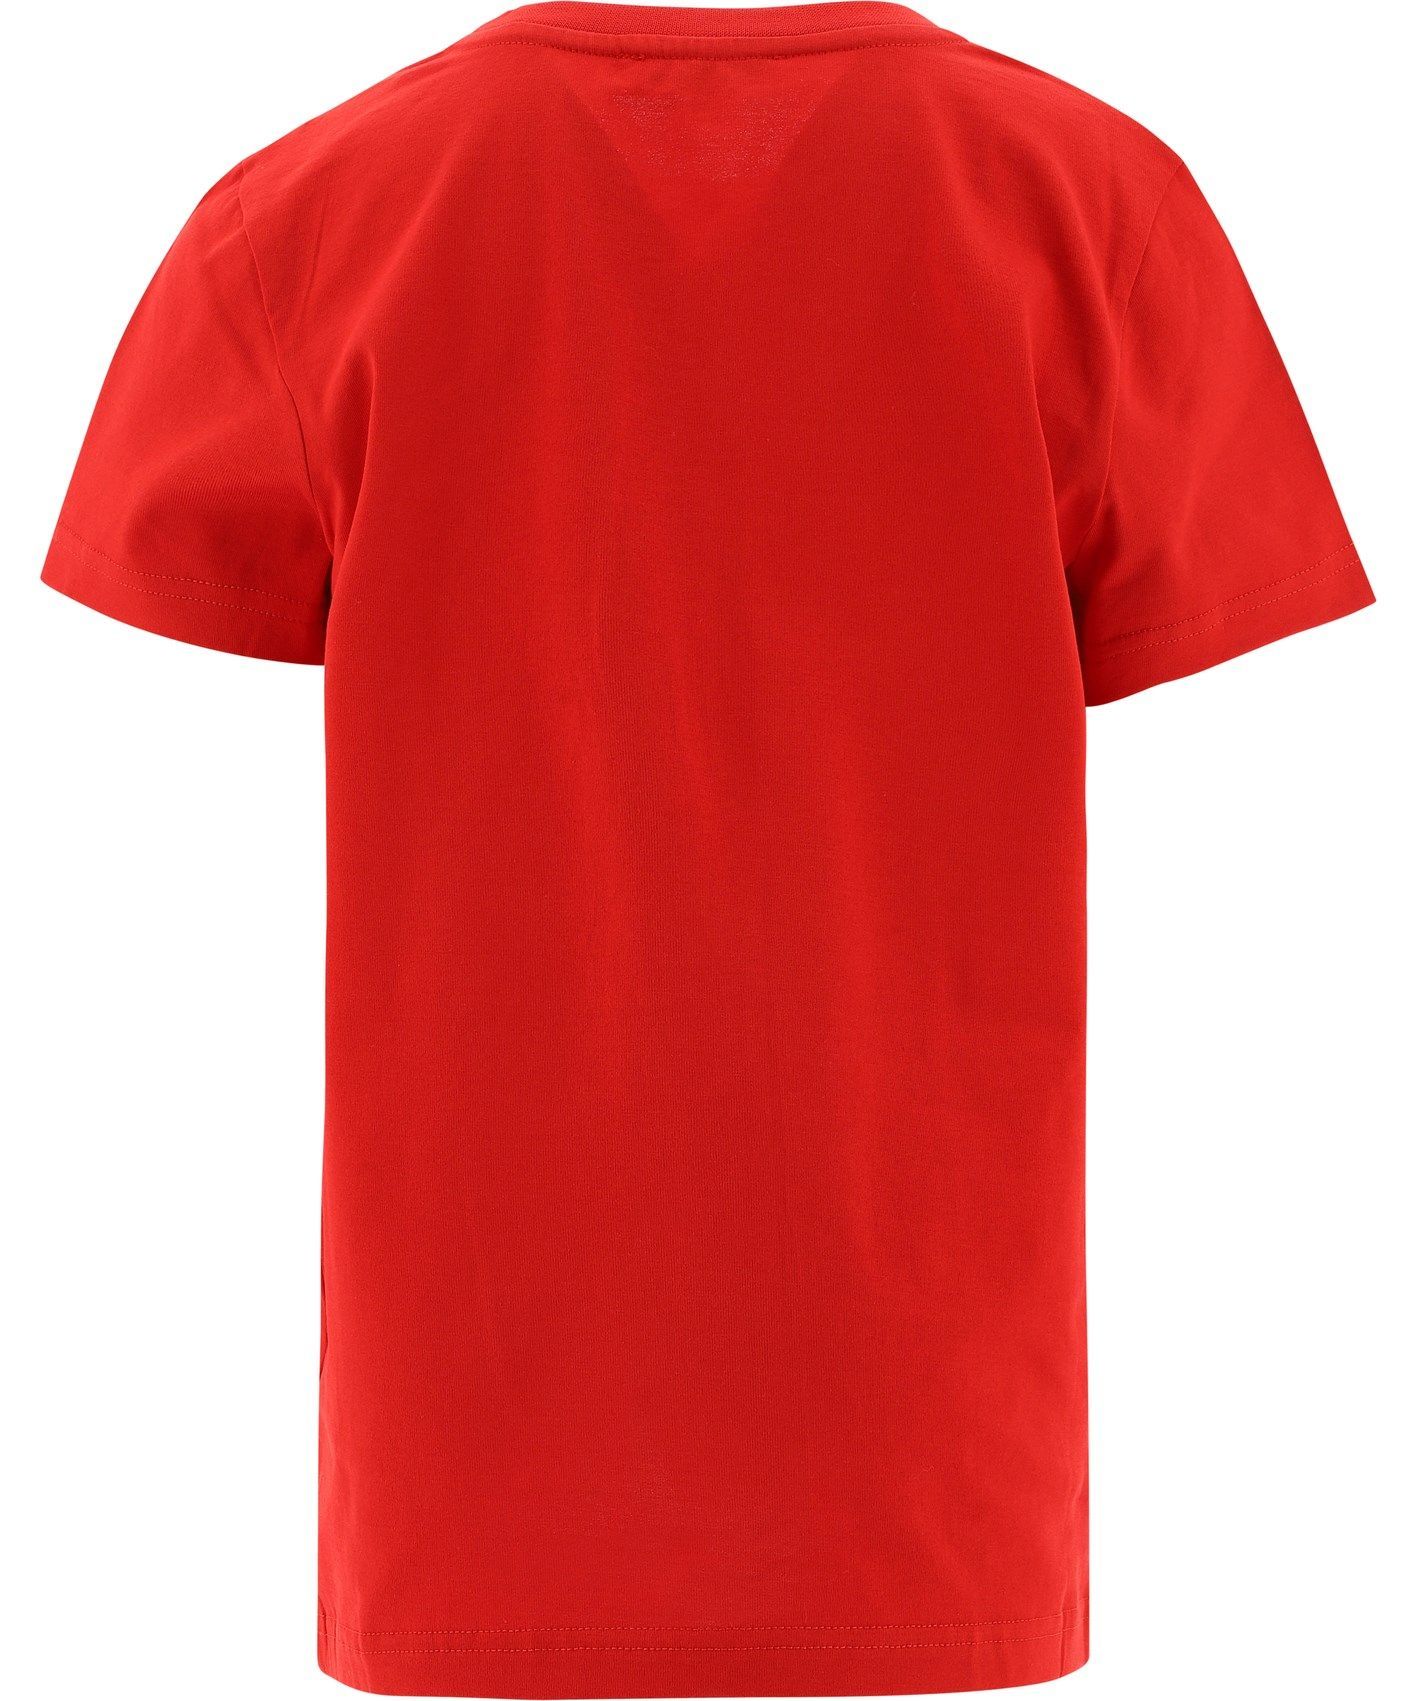 T-SHIRT GIVENCHY, COTTON 98%, ELASTANE 2%, color RED, FW20, product code H25J47K991